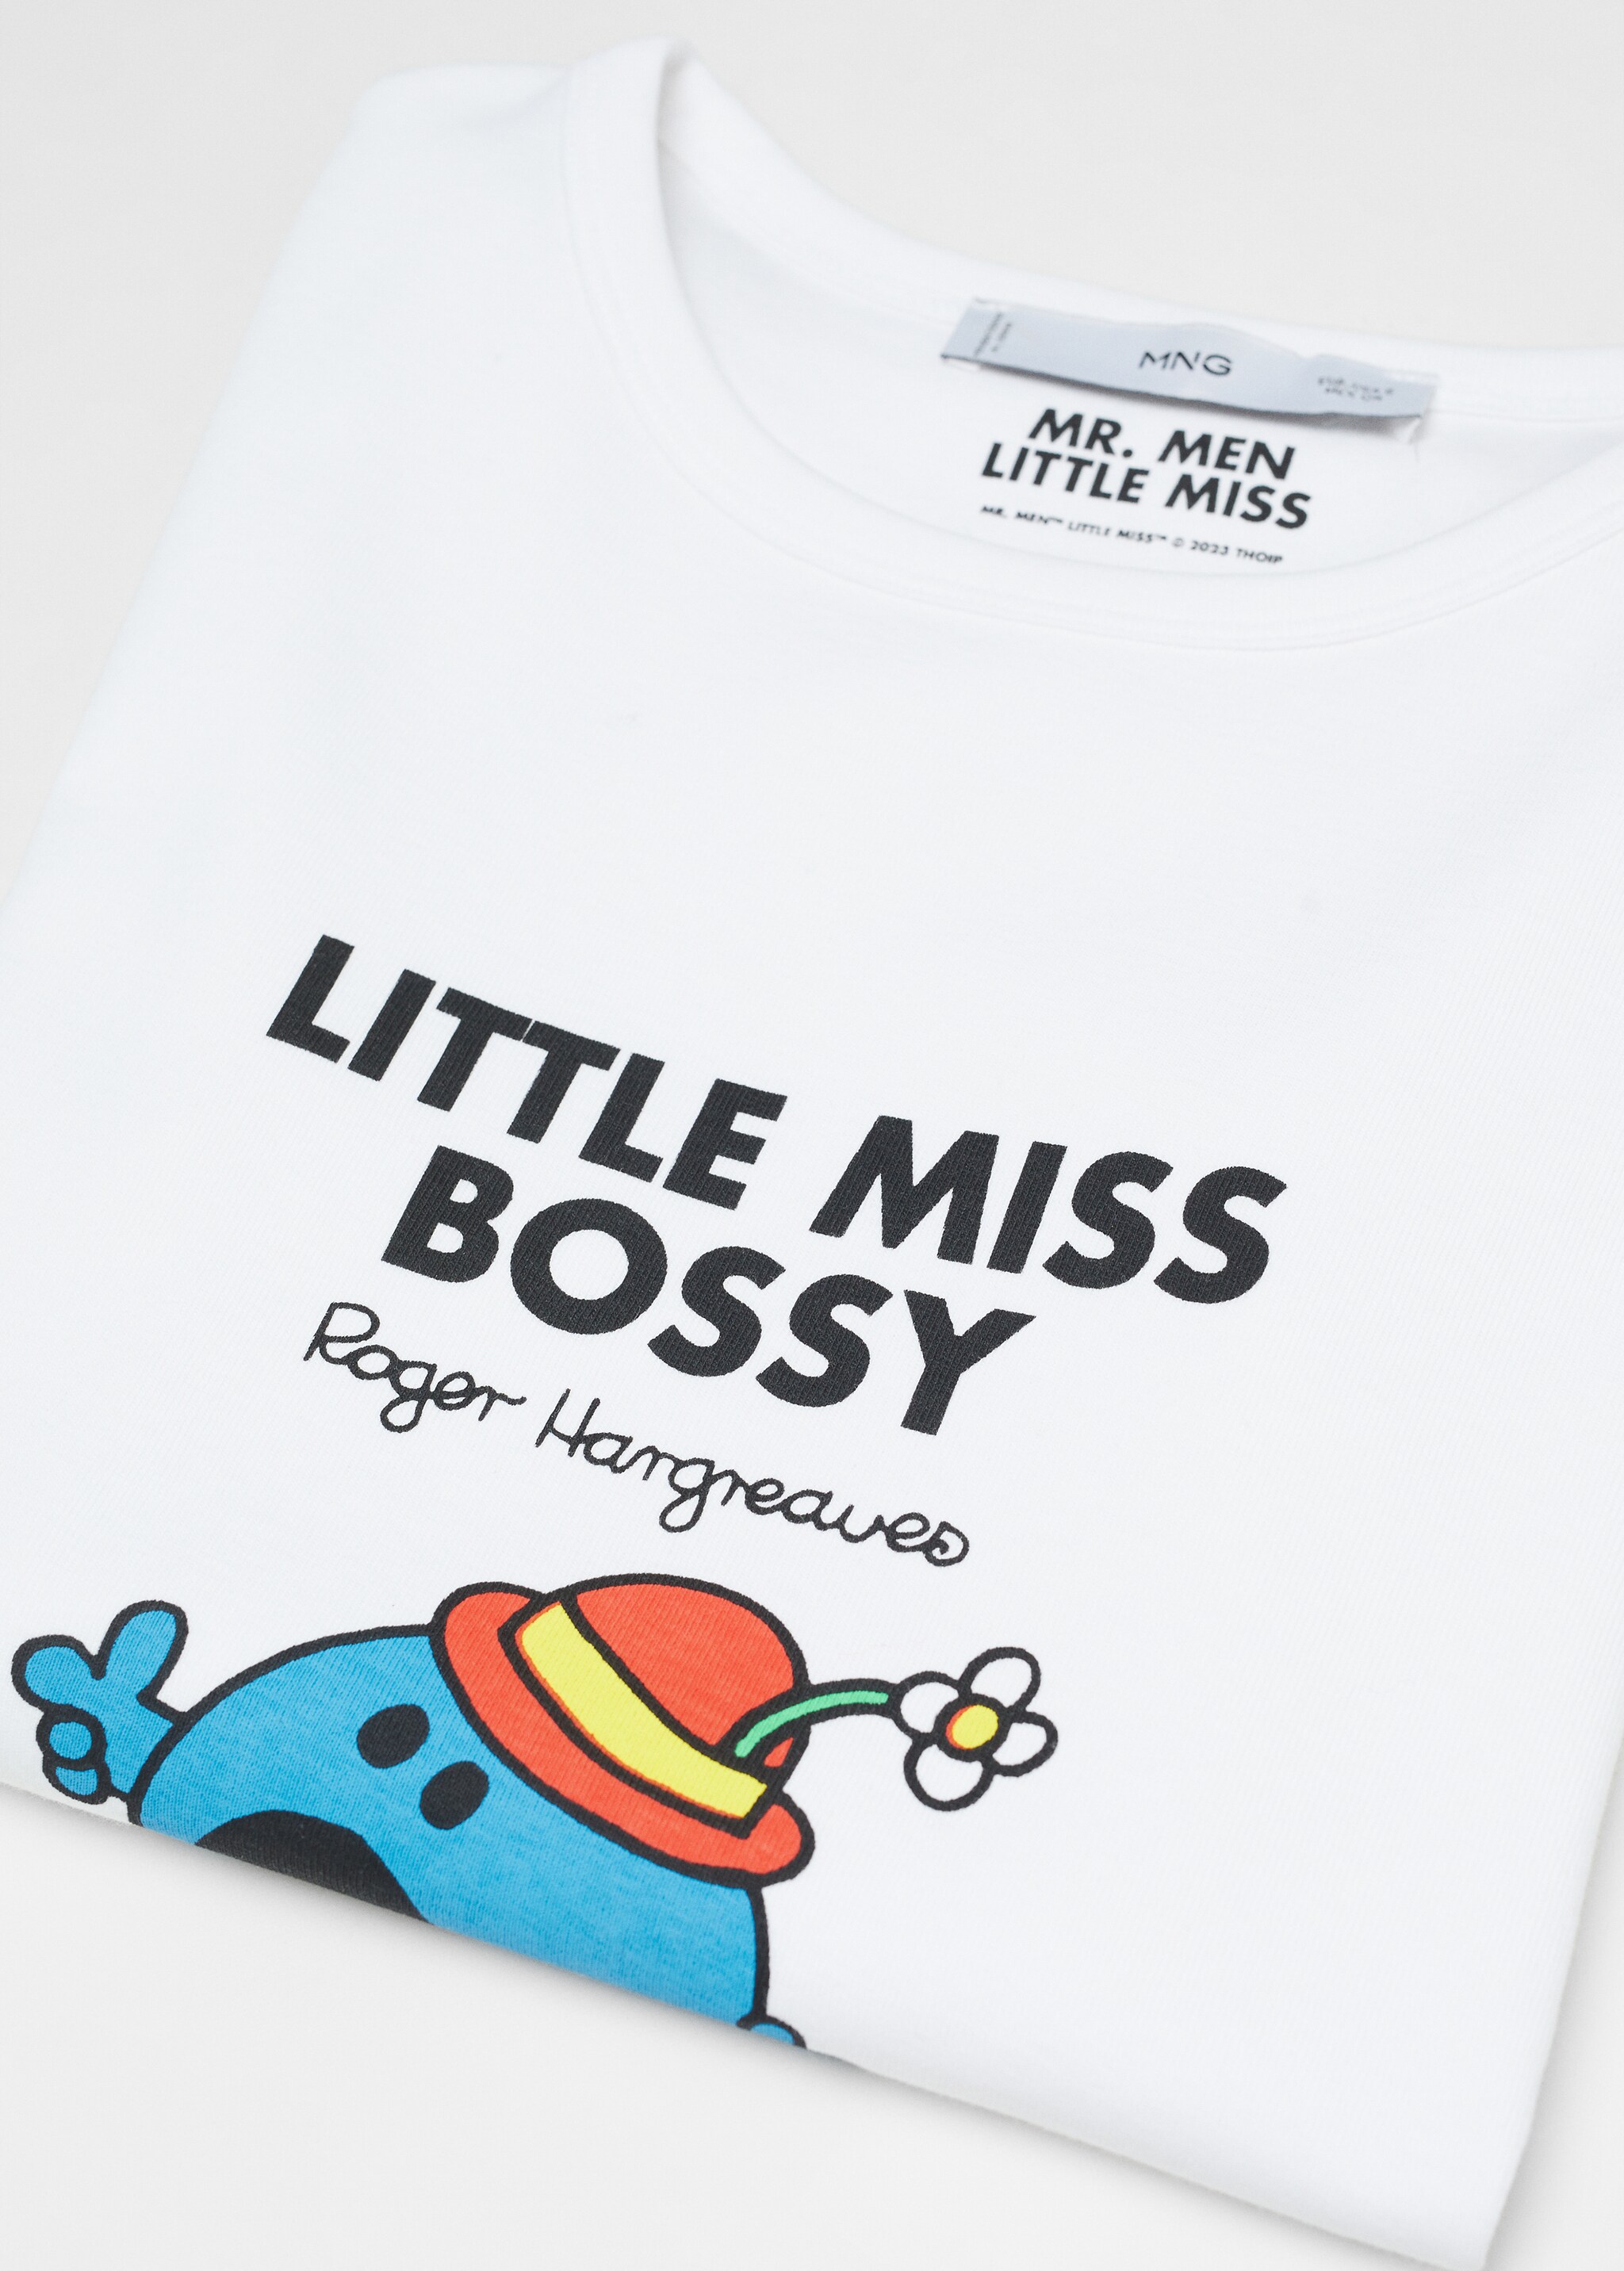 Mr. Men and Little Miss T-shirt - Details of the article 8